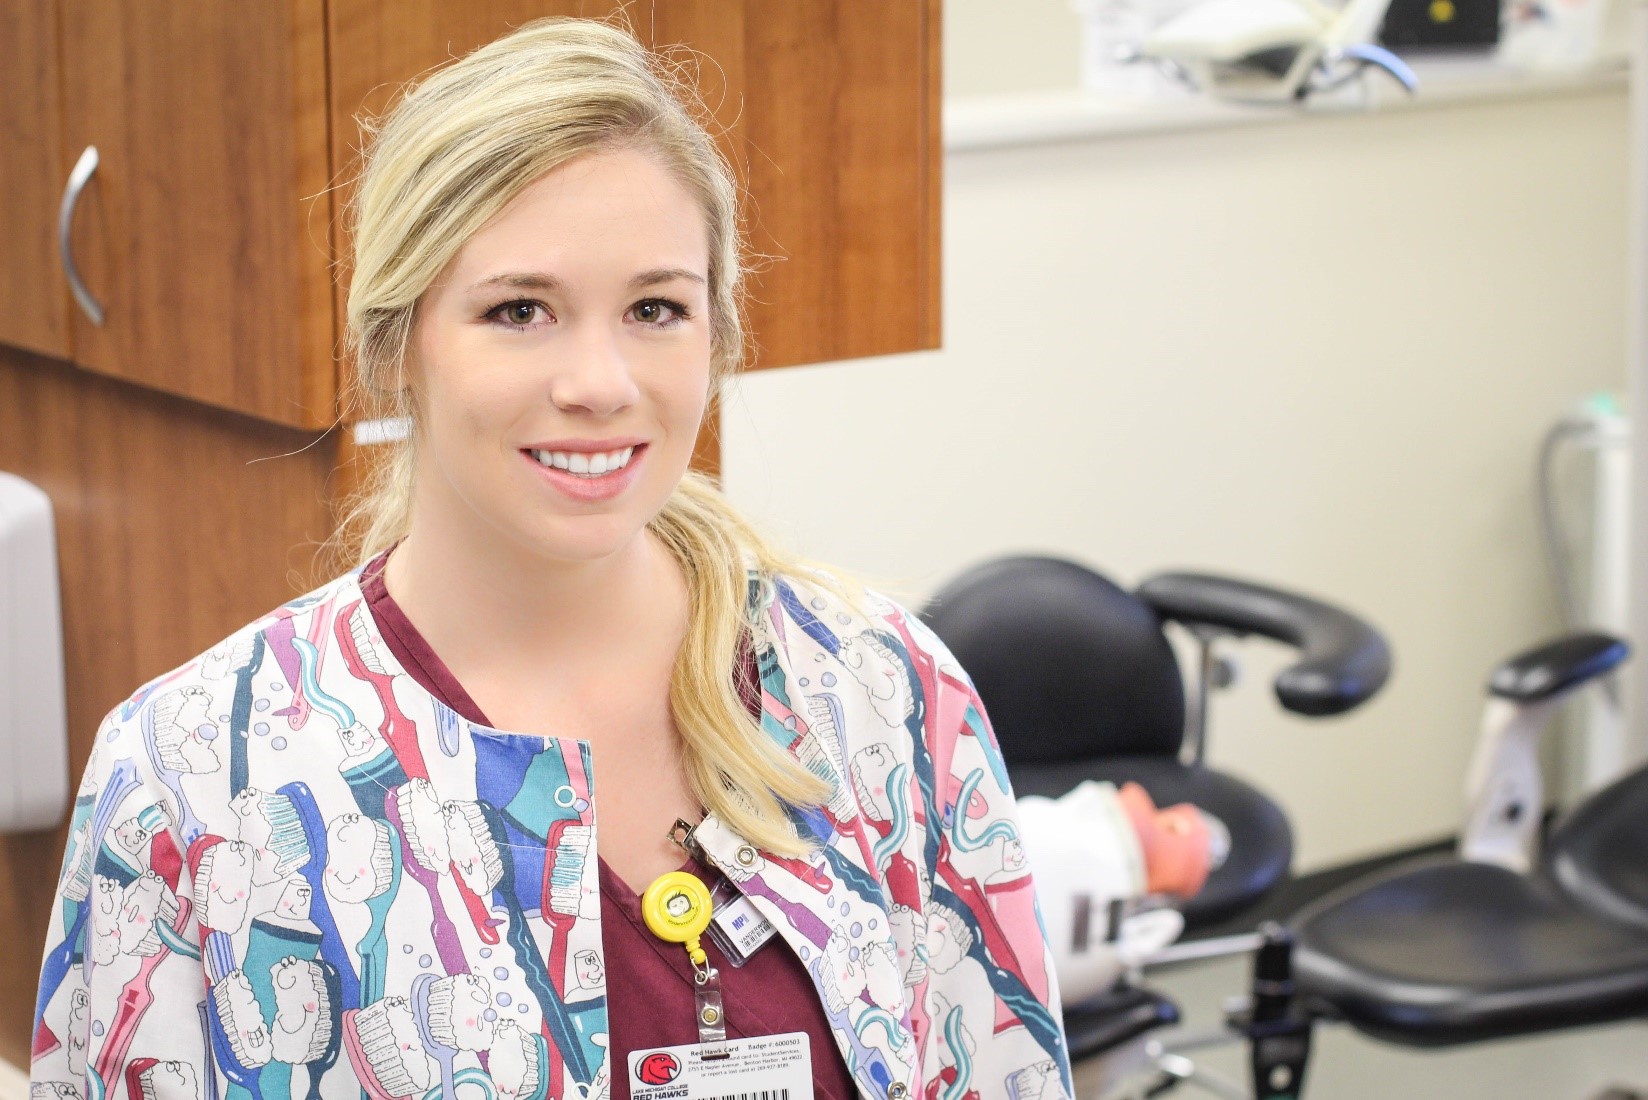 A student in tooth-themed scrubs smiles at the camera.